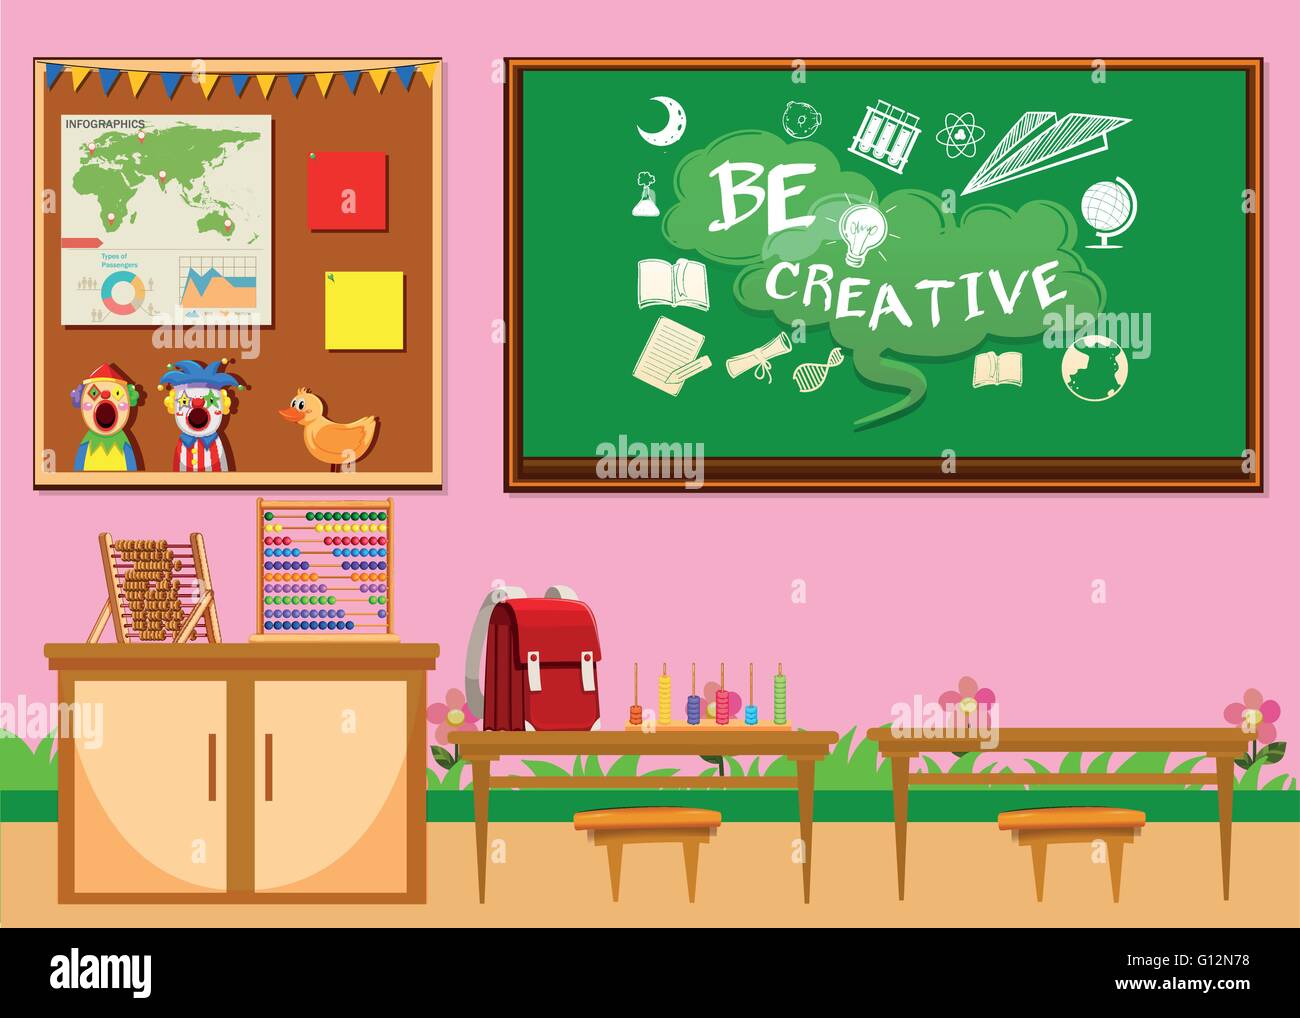 Elementary Classroom With Board And Chairs Illustration Stock Vector Image And Art Alamy